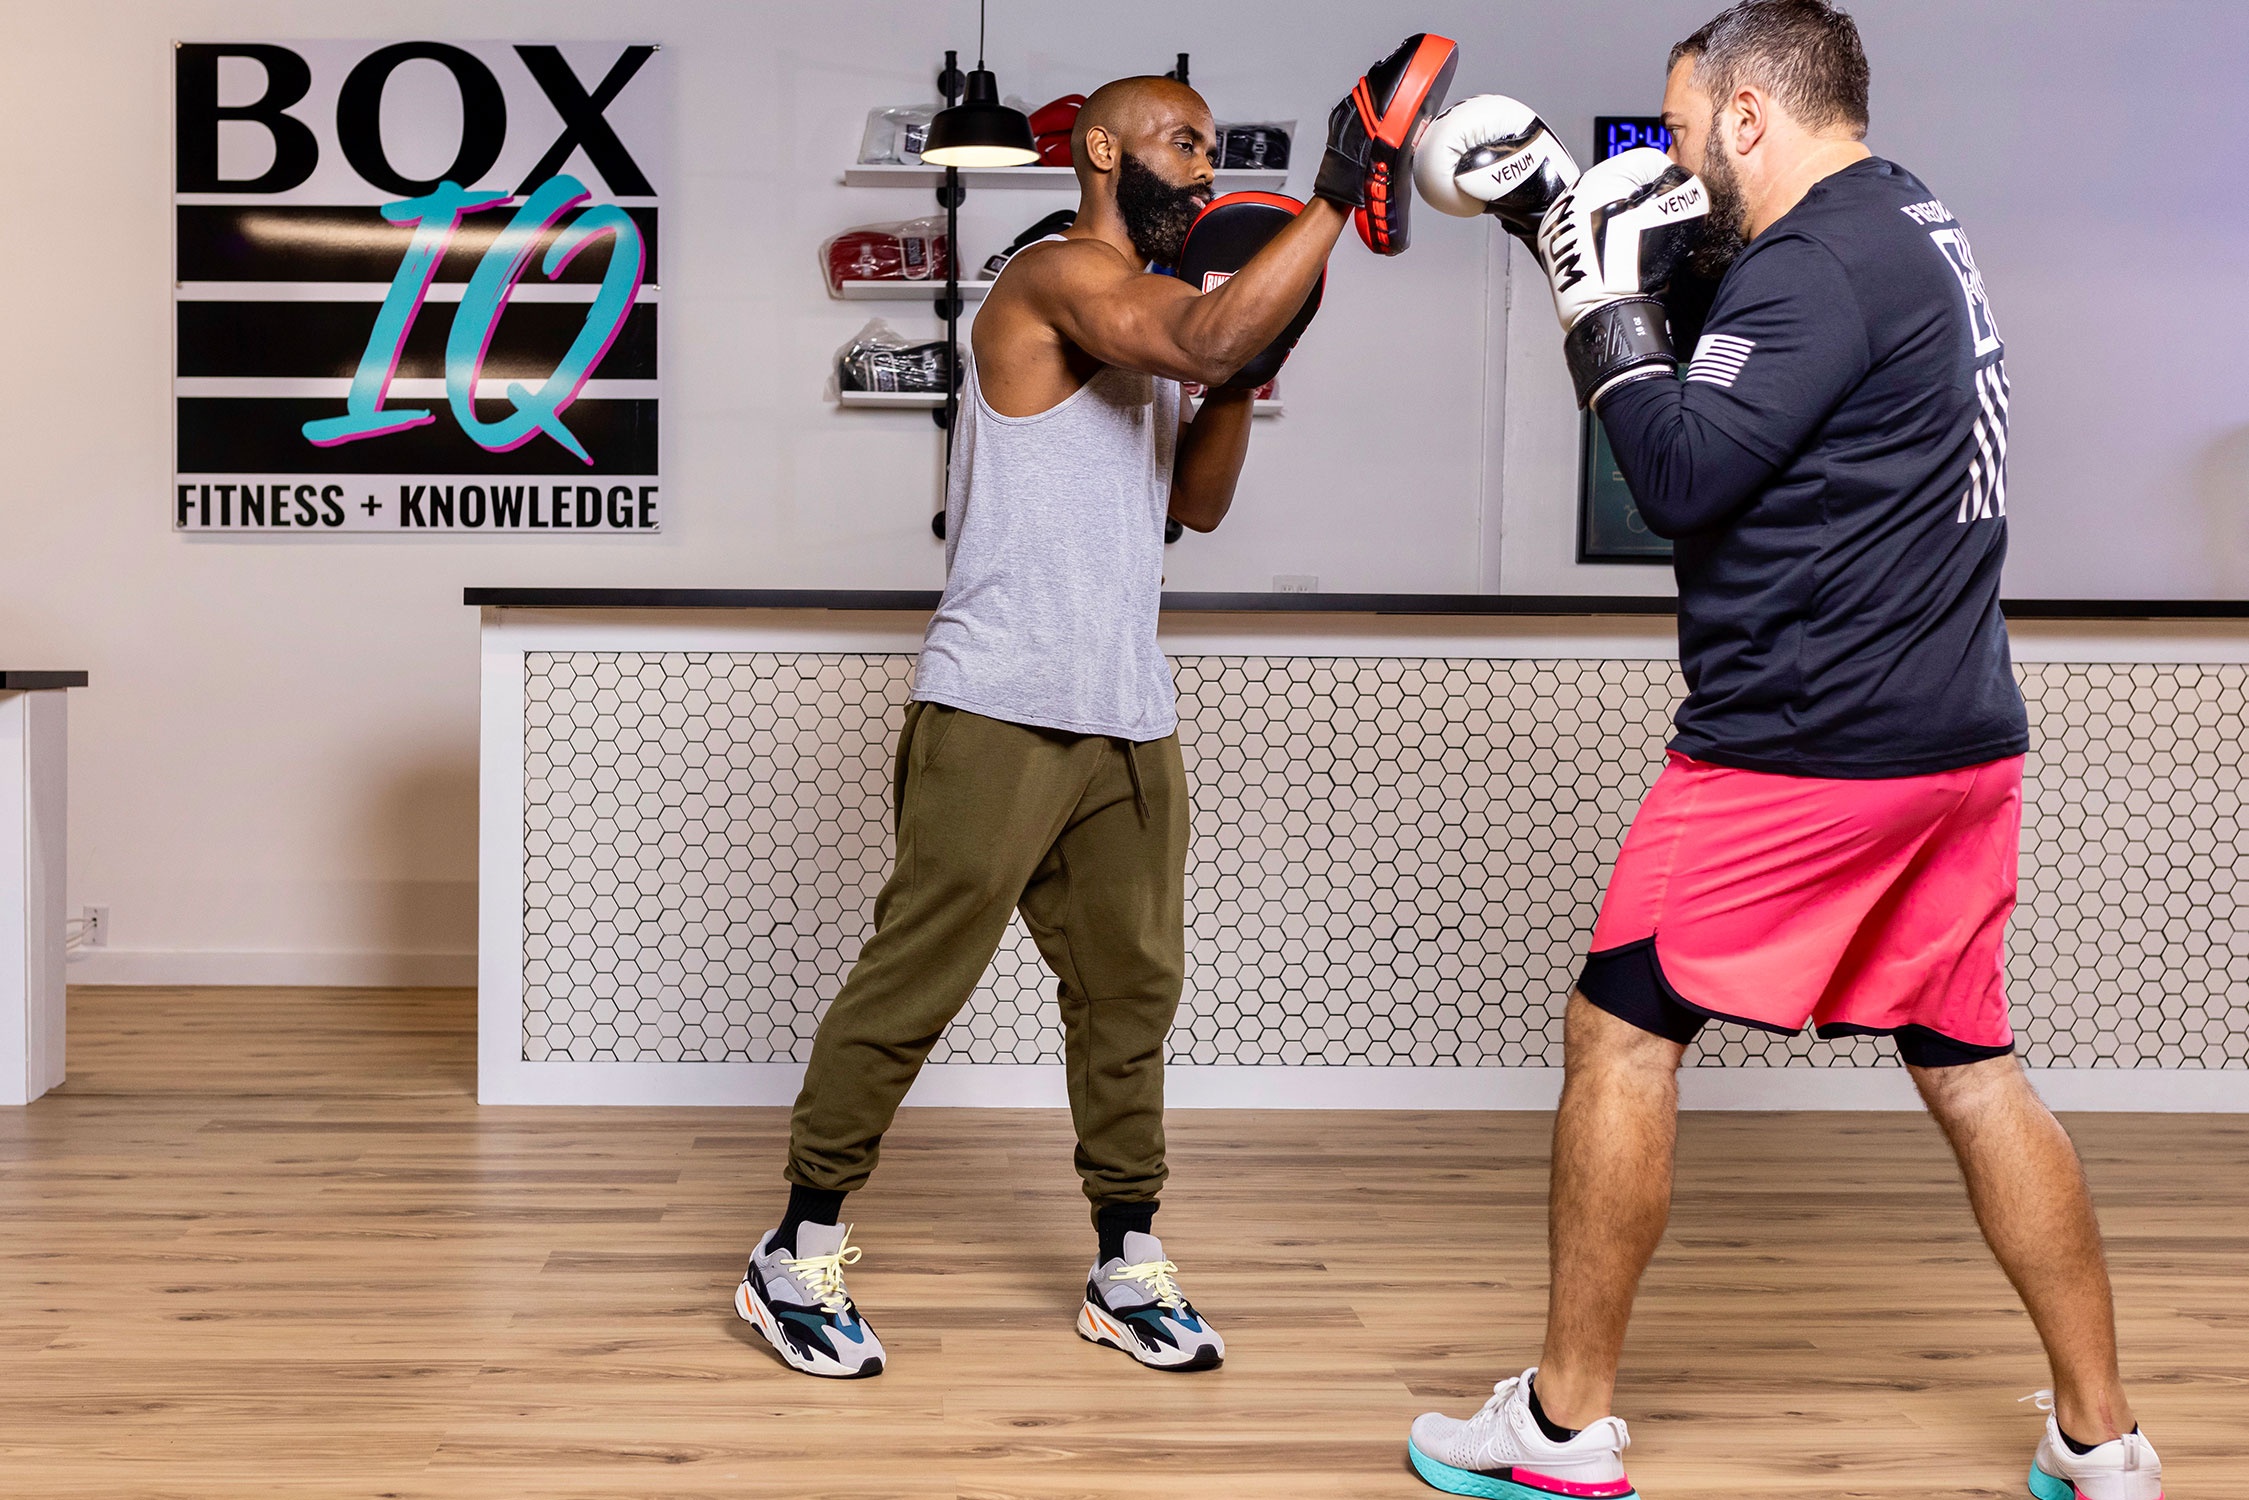 Boxing instructor Ely Honore wearing boxing punch hand pads training with boxing gym member